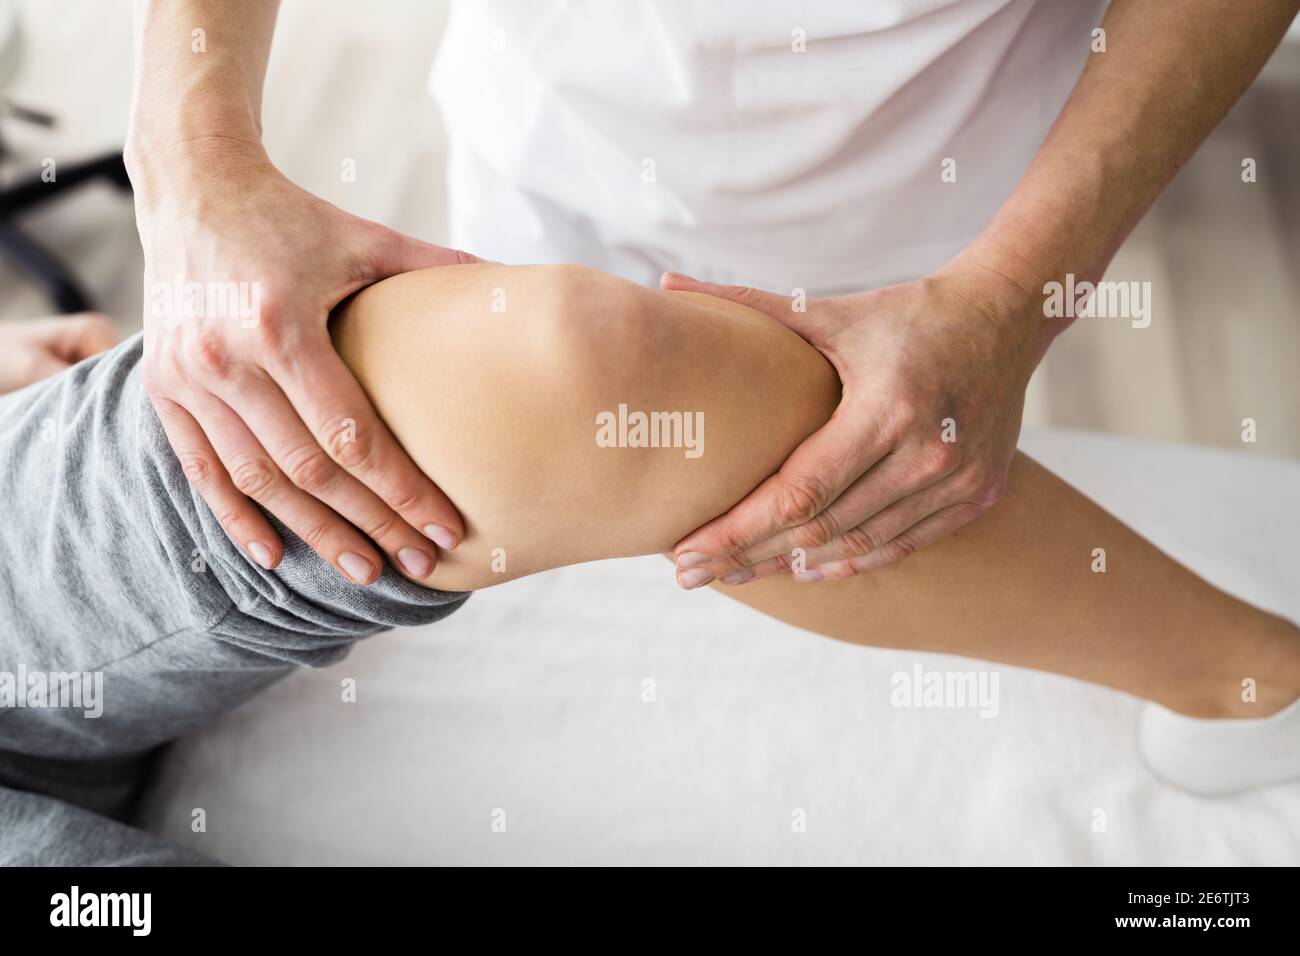 Knee Joint Sports Rehab Massage And Physiotherapy Stock Photo